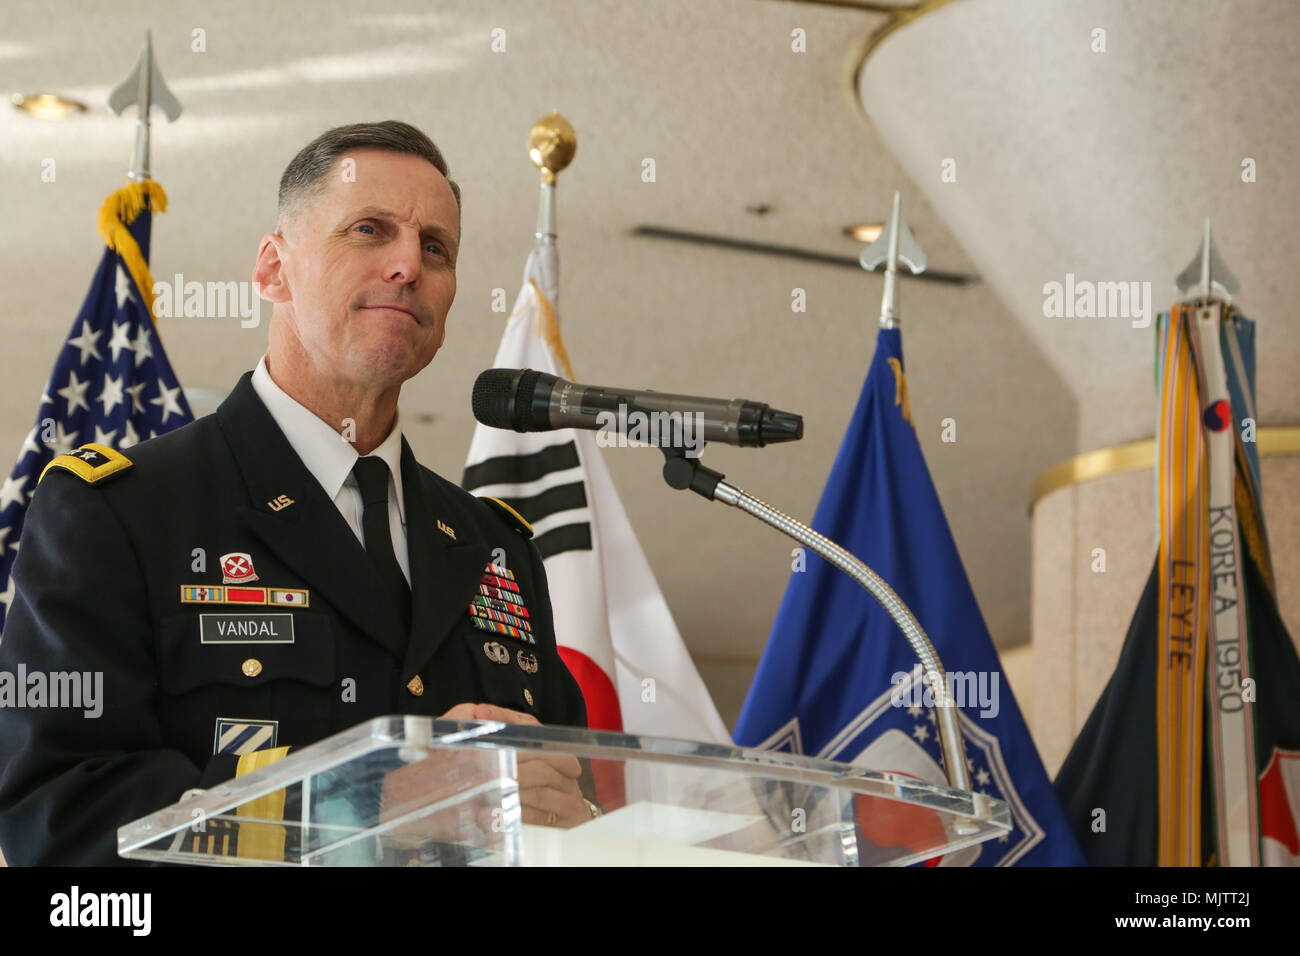 U.S Army Lt. Gen. Thomas S. Vandal commander of the Eighth Army, provides opening remarks at the Holiday concert in Seoul, Korea Dec. 17, 2017. The concert was hosted by the Eighth Army command in conjunction with local community leaders during the holiday season to promote harmonious relations between the U.S. Army and the Republic of Korea (ROK). Over 1500 U.S. Soldiers and ROK soldiers attended performances by the Eighth Army Band and the Prime Philharmonic Orchestra . (U.S. Army photo by Pfc. Edward Randolph) Stock Photo